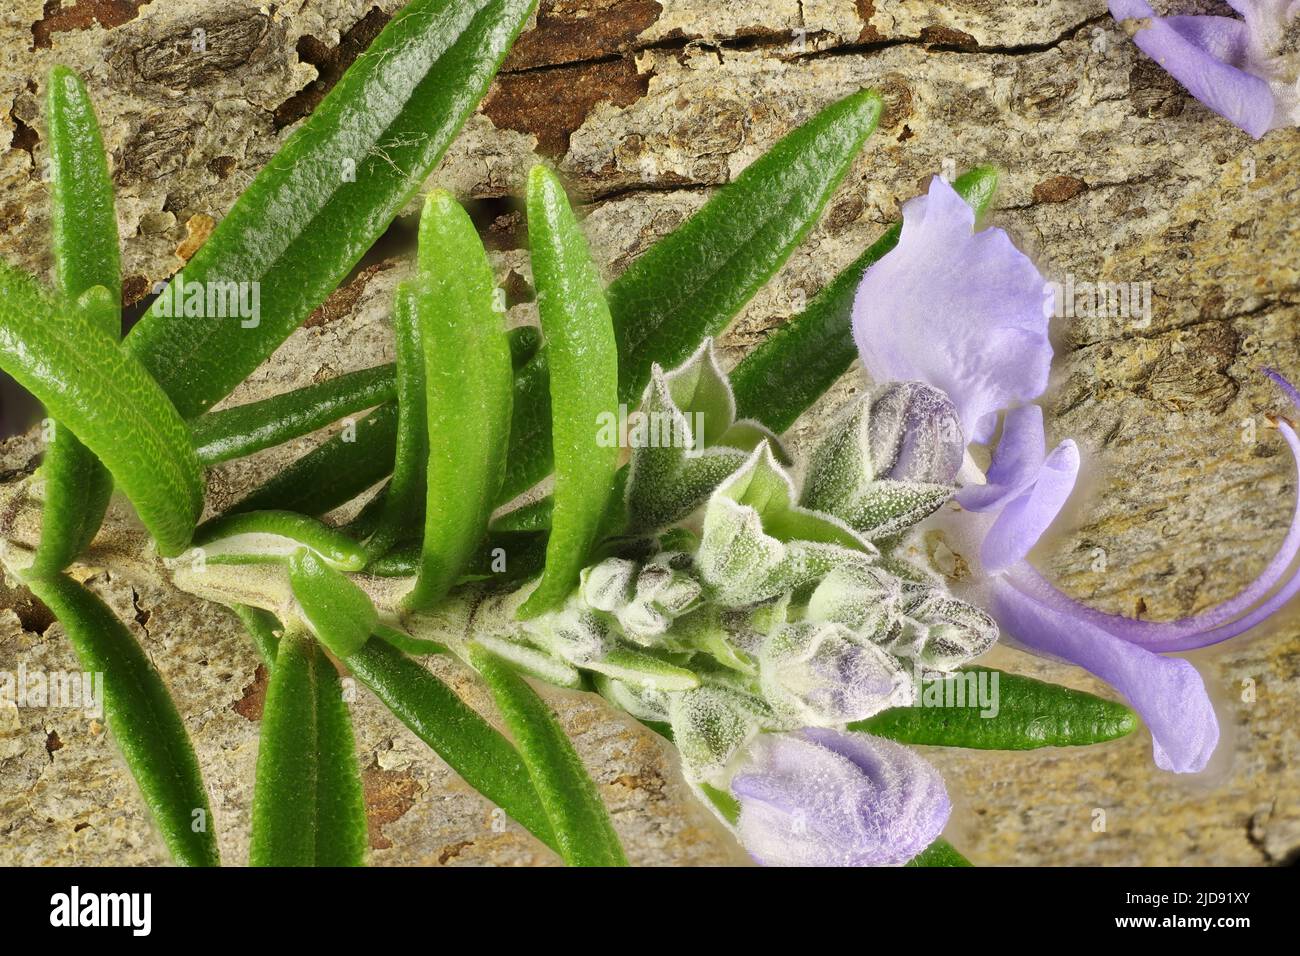 Isolated Lavender flowers, buds and foliage against bark background Stock Photo